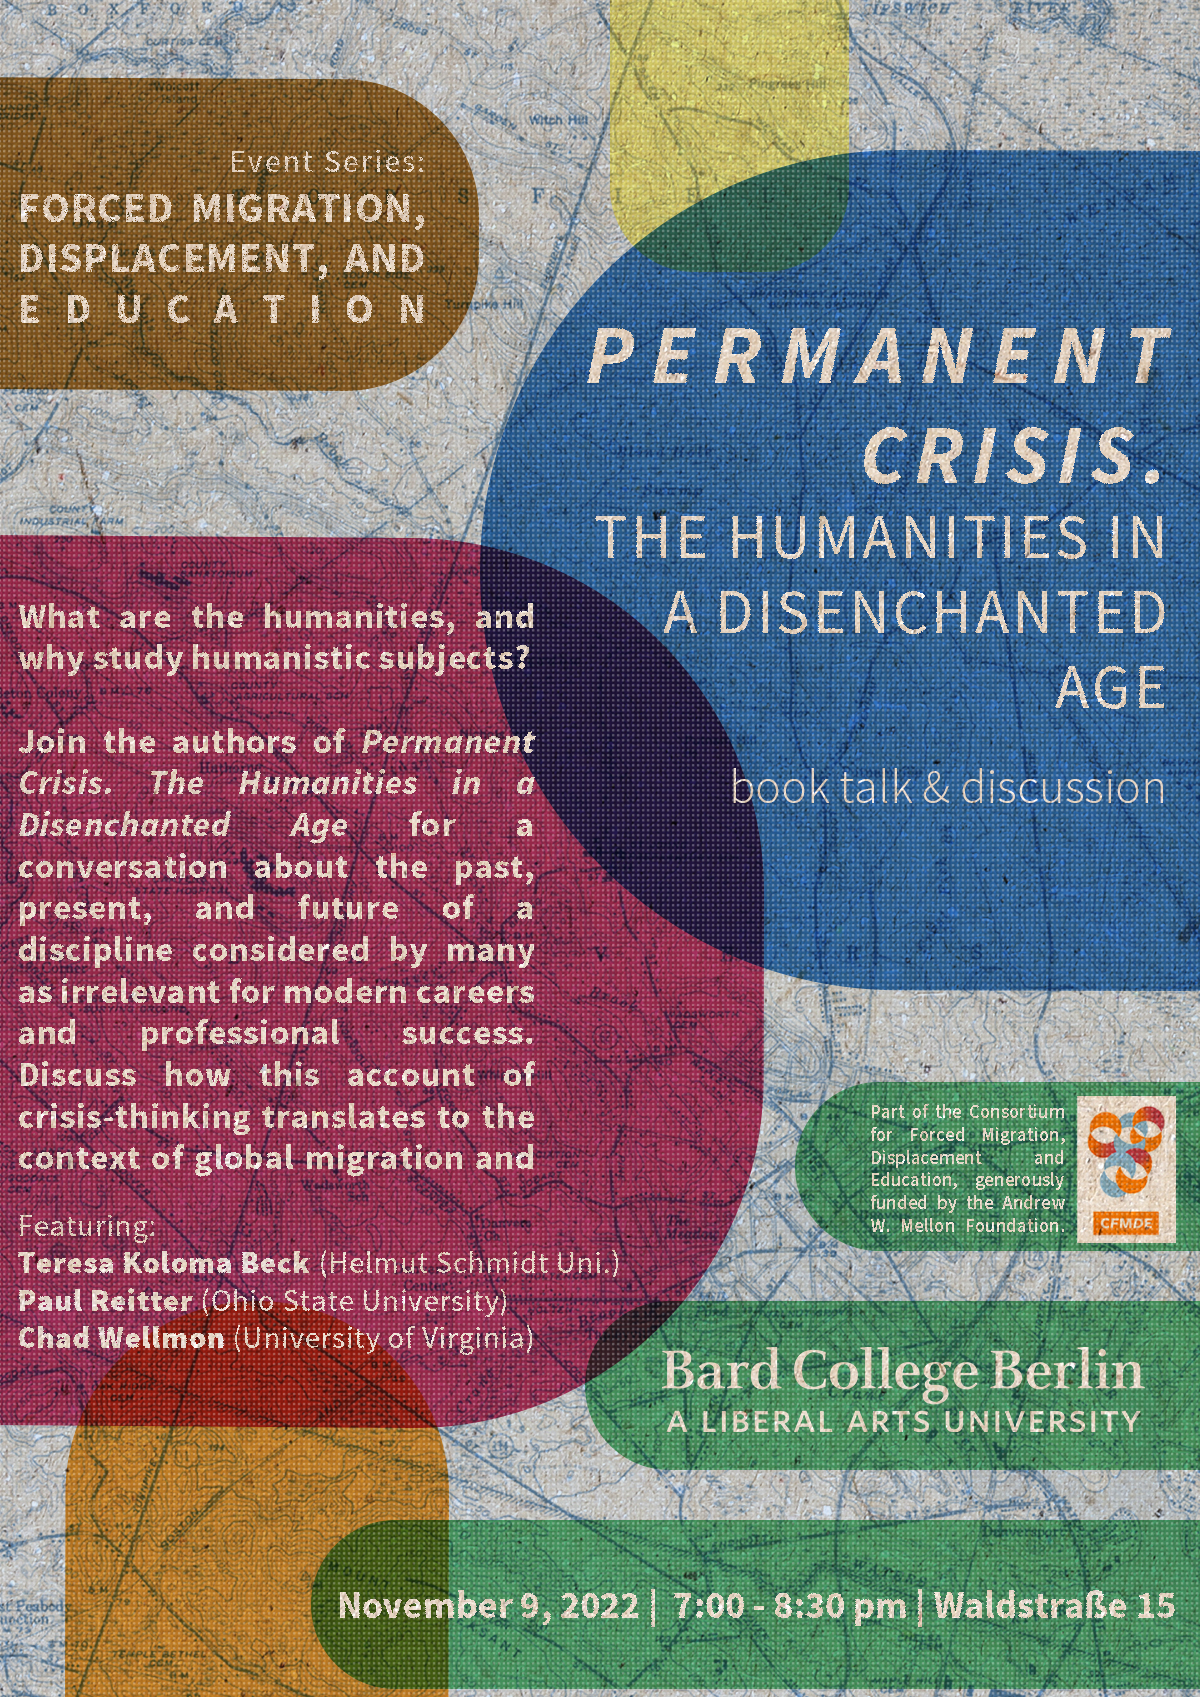 Permanent Crisis. The Humanities in a Disenchanted Age